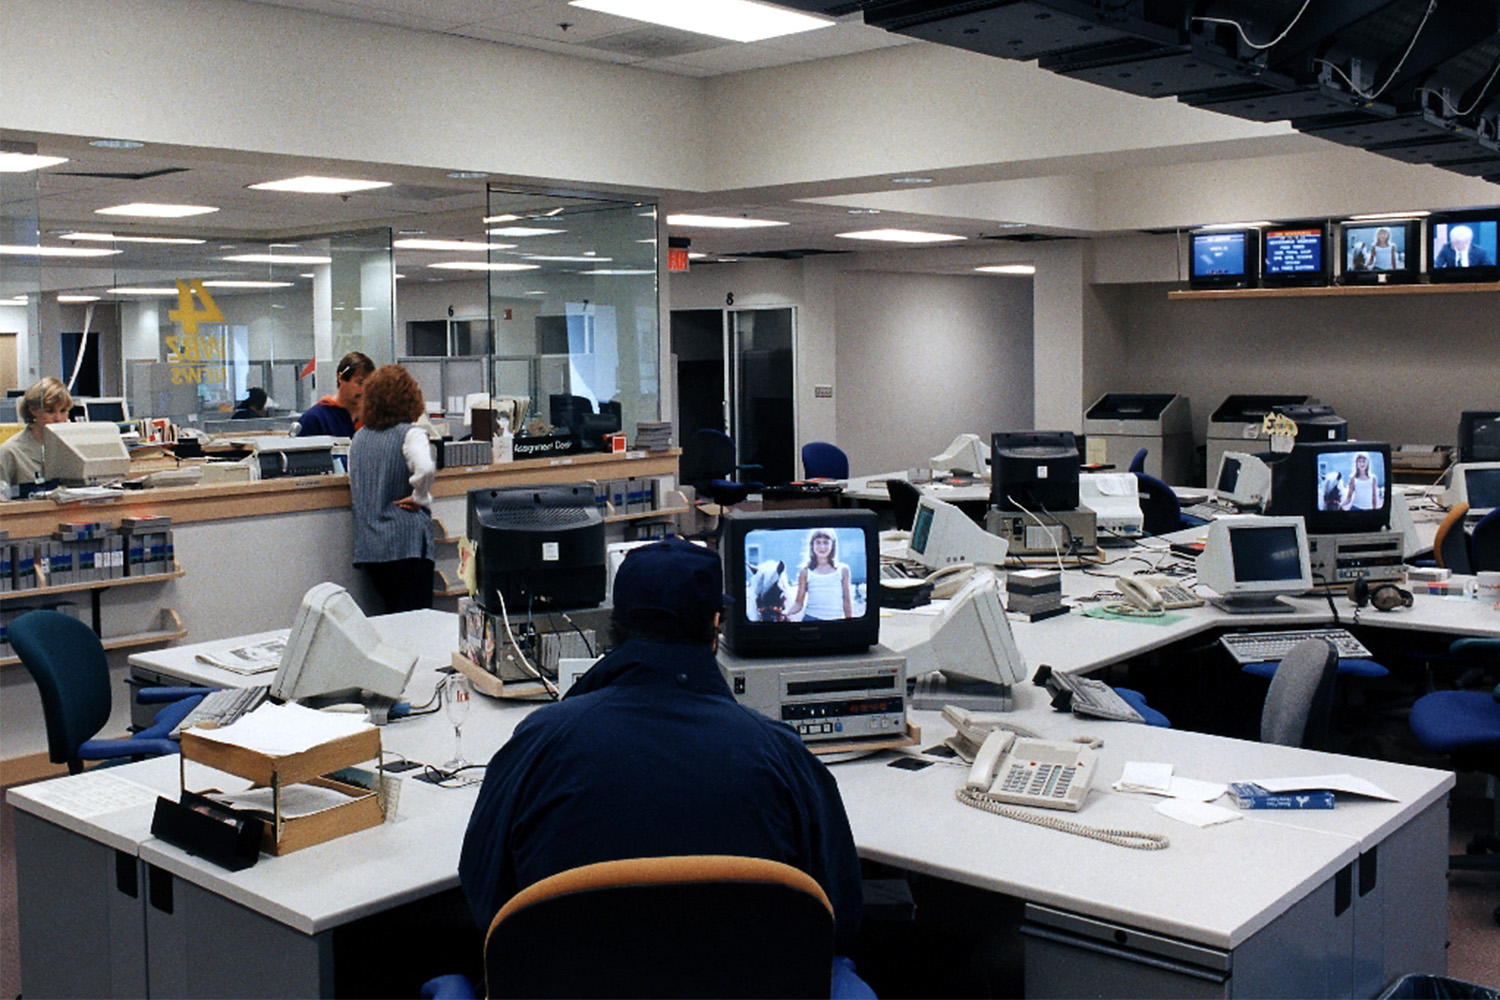 Newsroom with multiple TV's, and people working at desks 